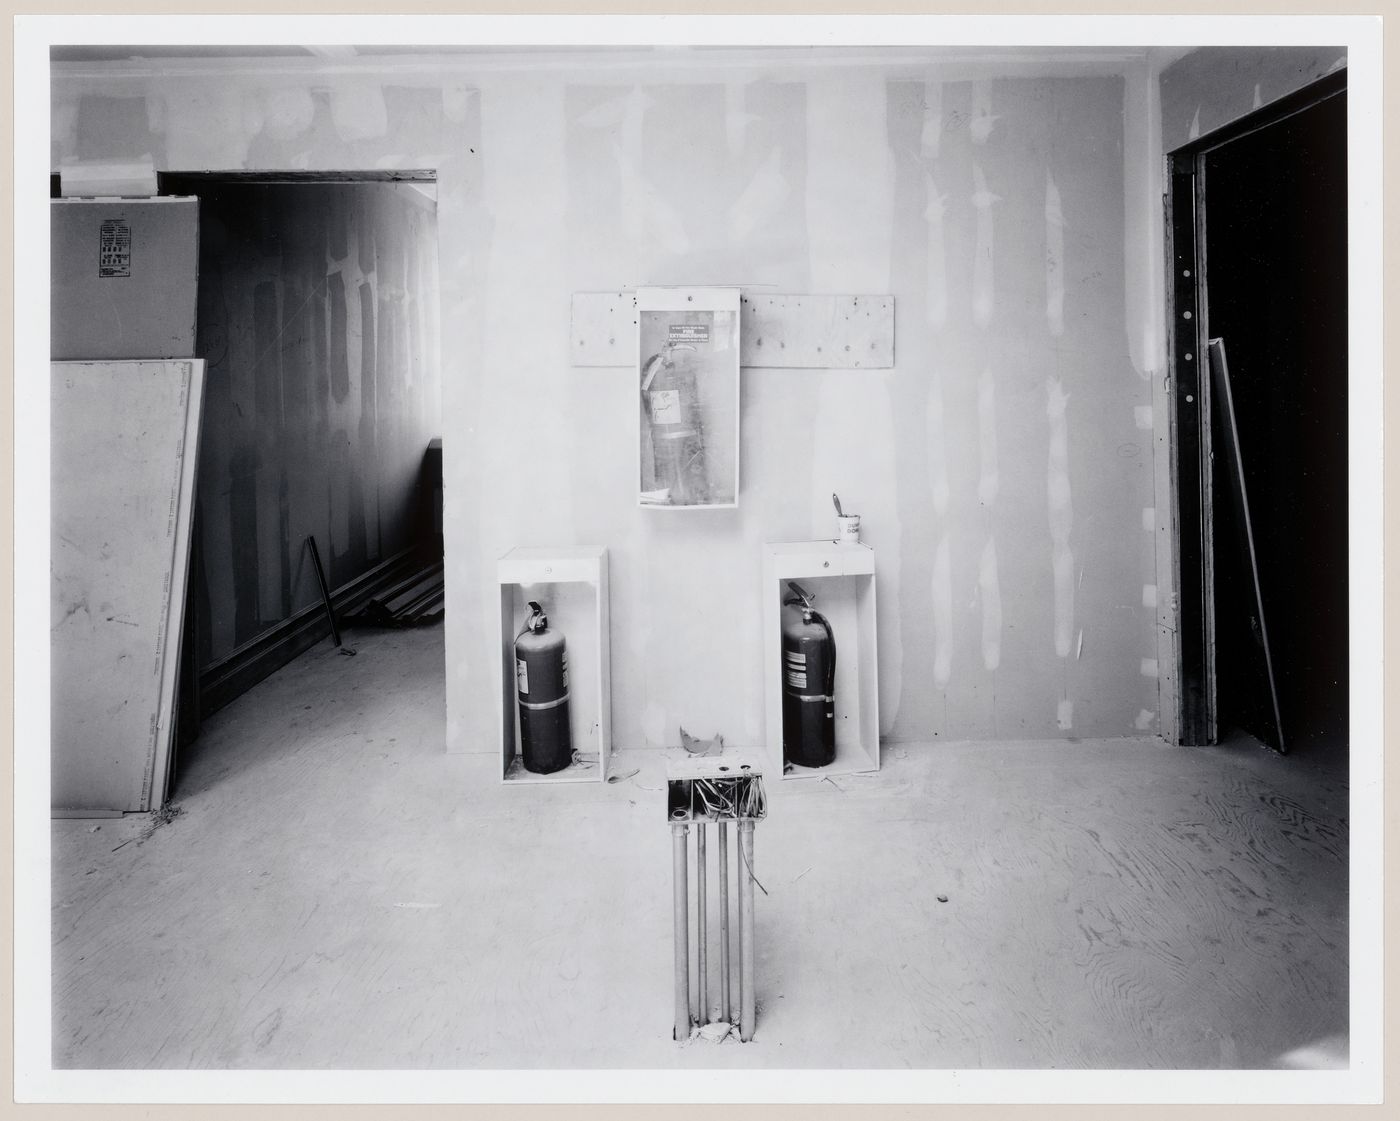 Interior view showing fire extinguishers temporarily installed on a wall, Shaughnessy House under renovation, Montréal, Québec